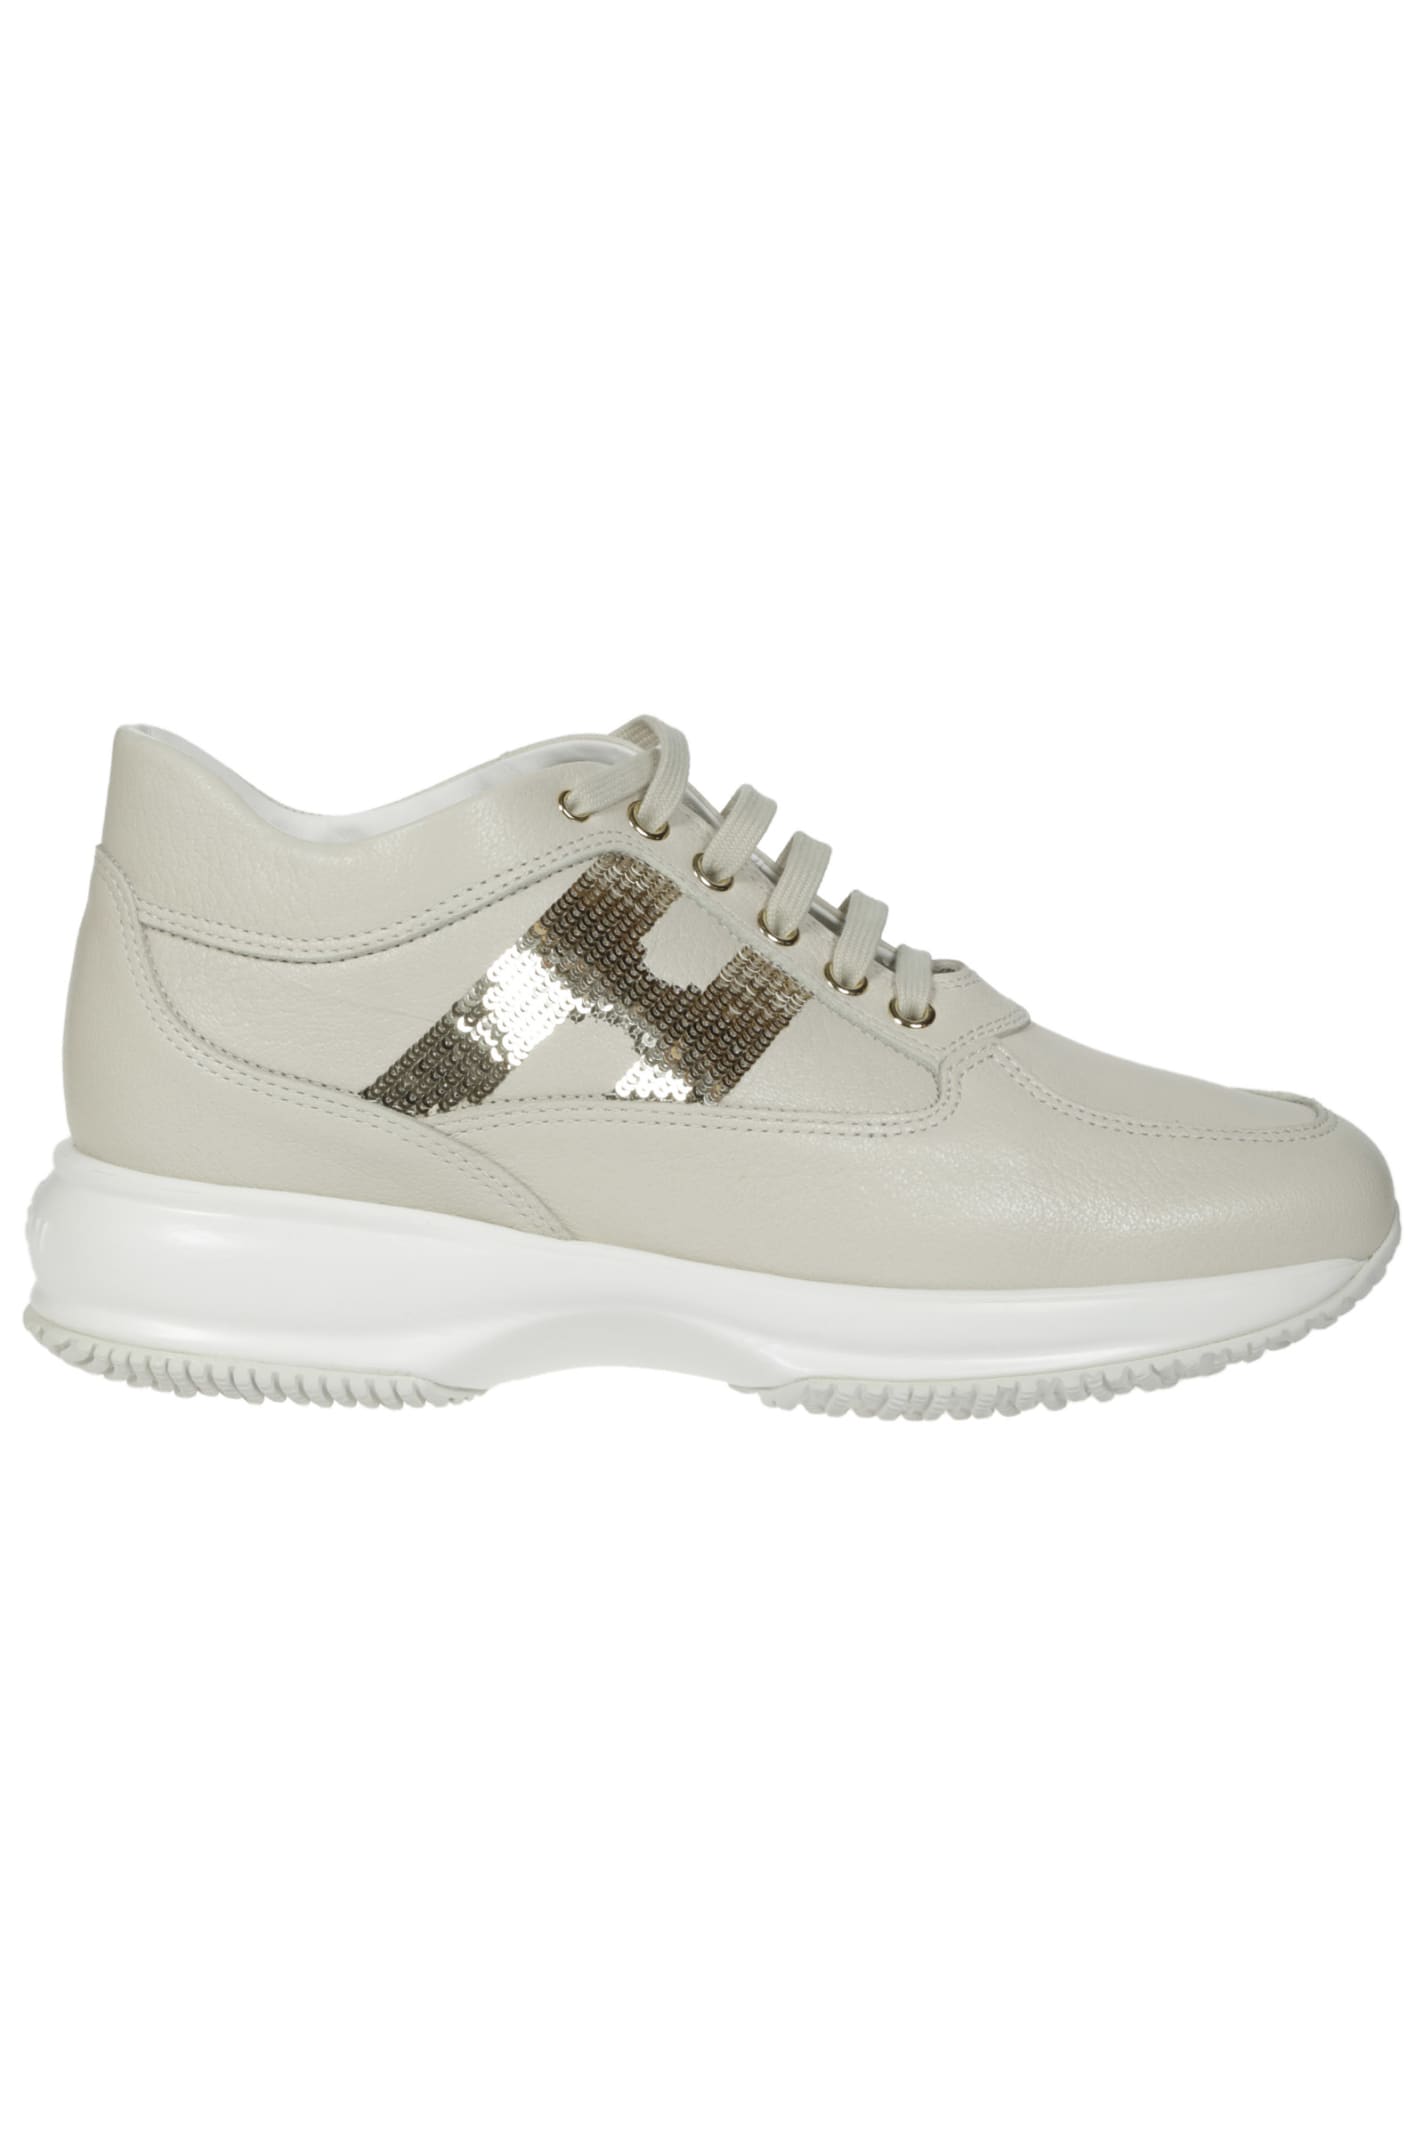 Hogan Interactive Micropaillettes Sneakers